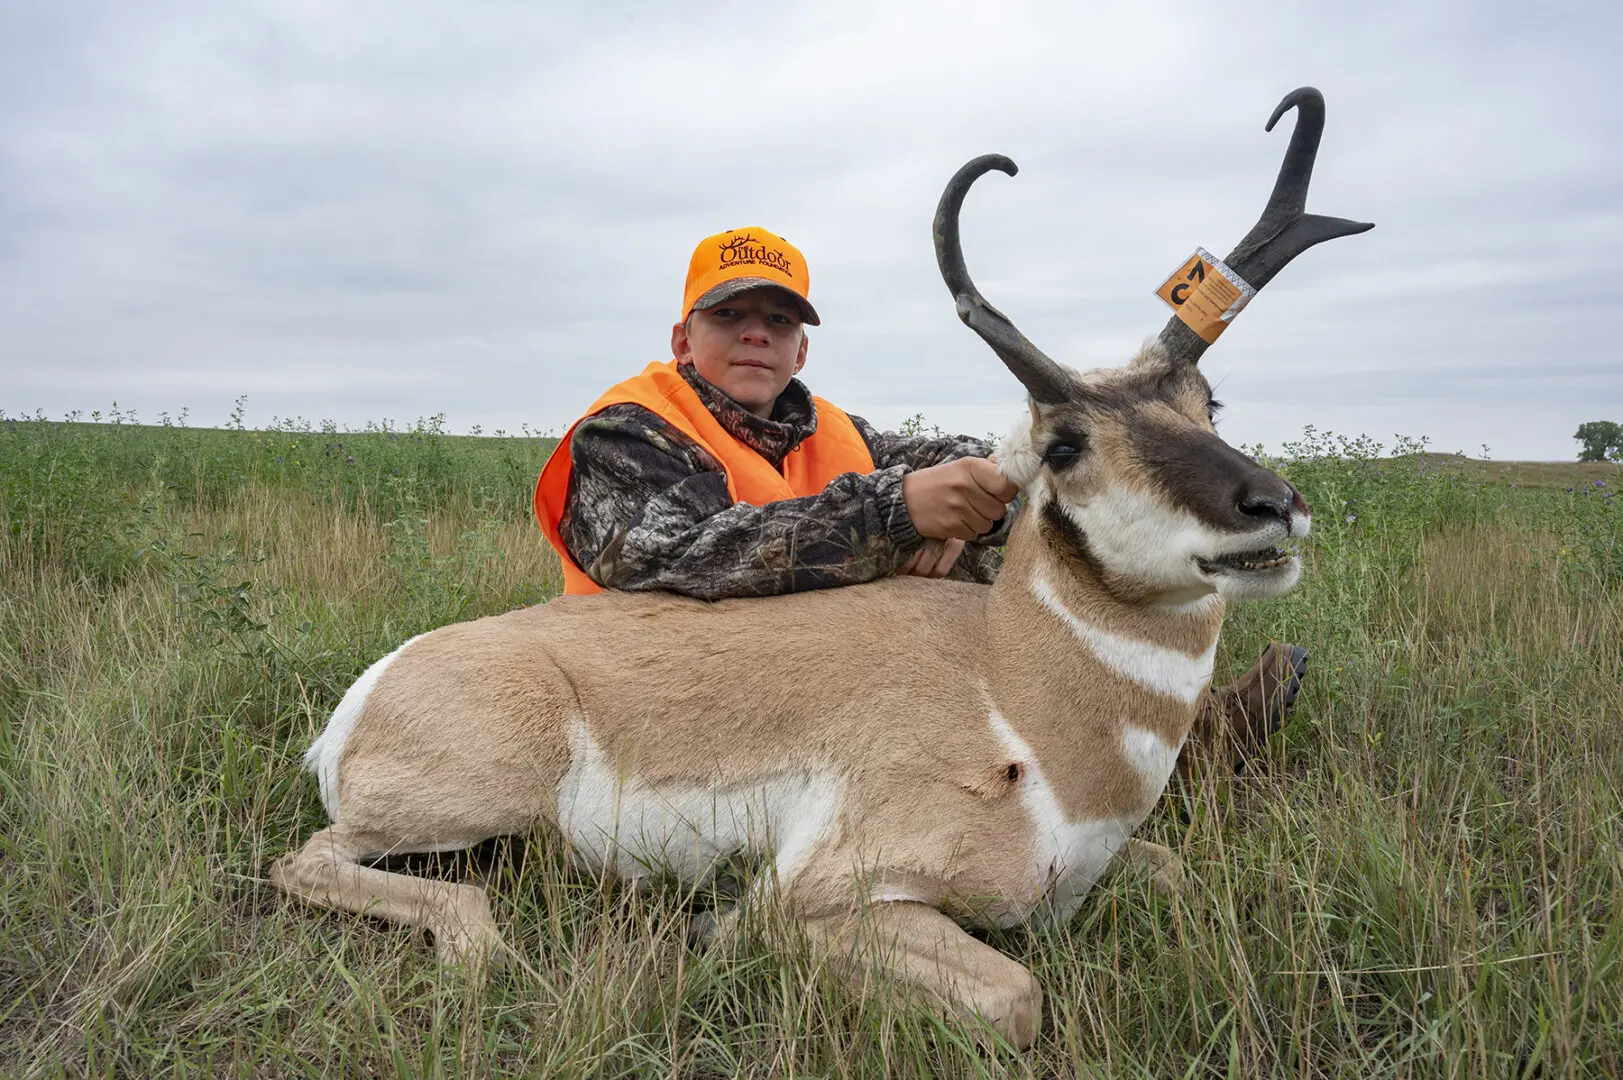 A man in an orange vest is holding a rifle and sitting on the ground with a deer.